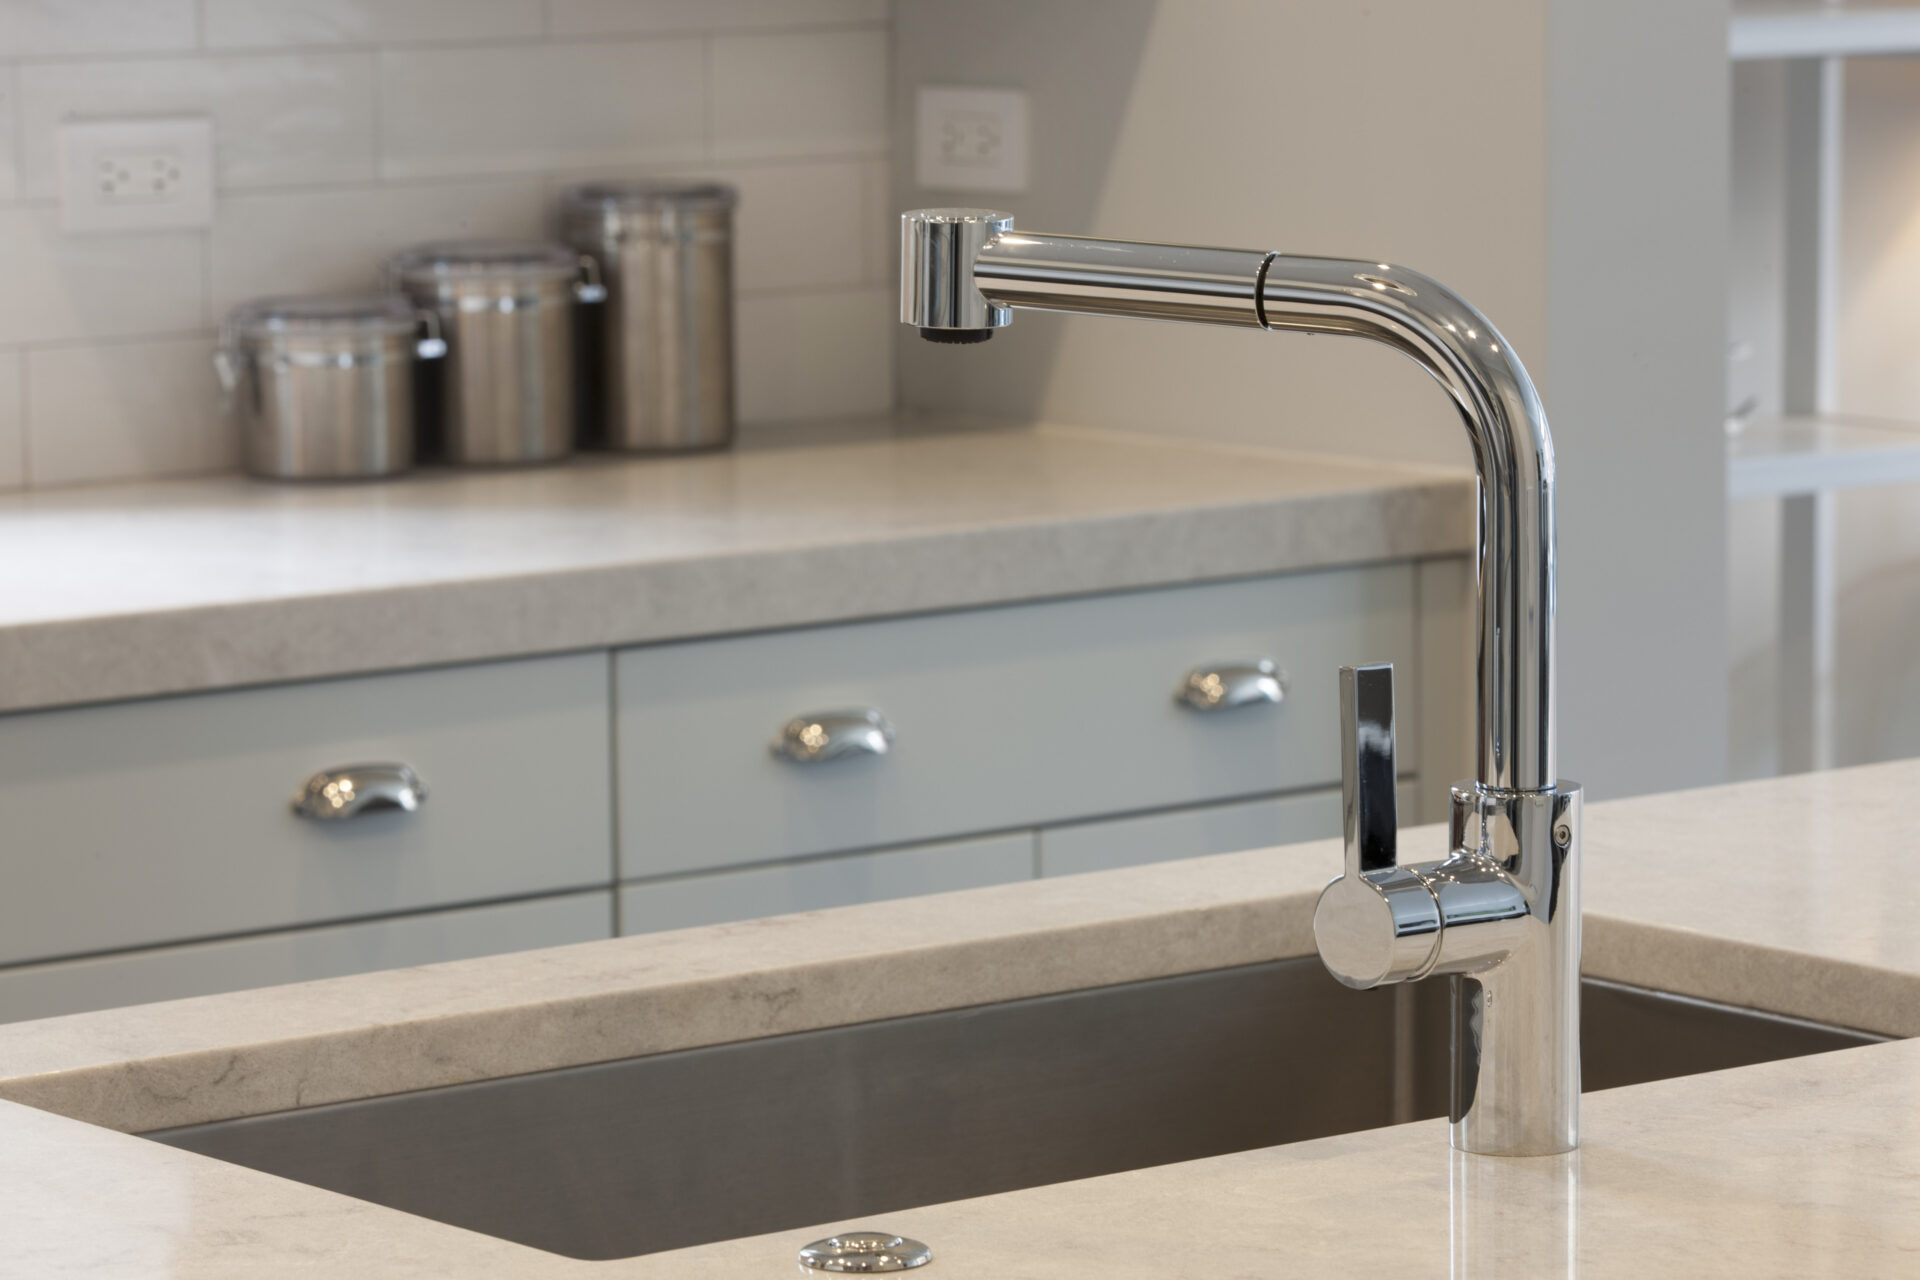 Stainless faucet in elegant home